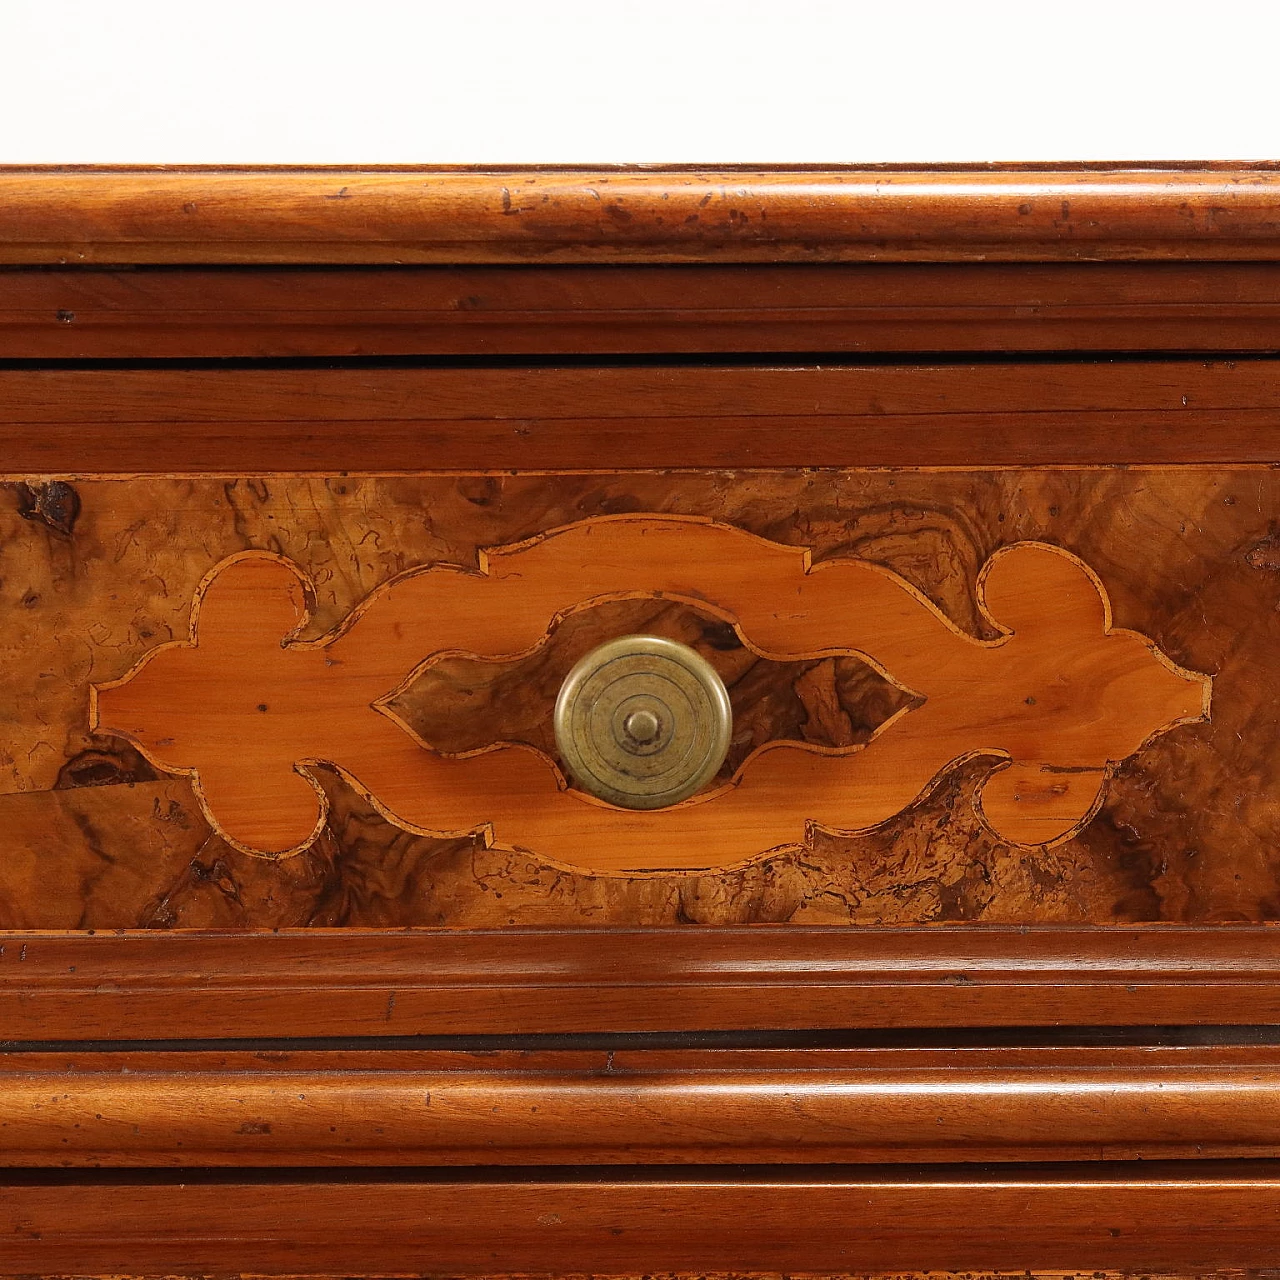 Bergamasque Baroque walnut-root canterano with cherrywood inlays and maple purfling, early 18th century 5